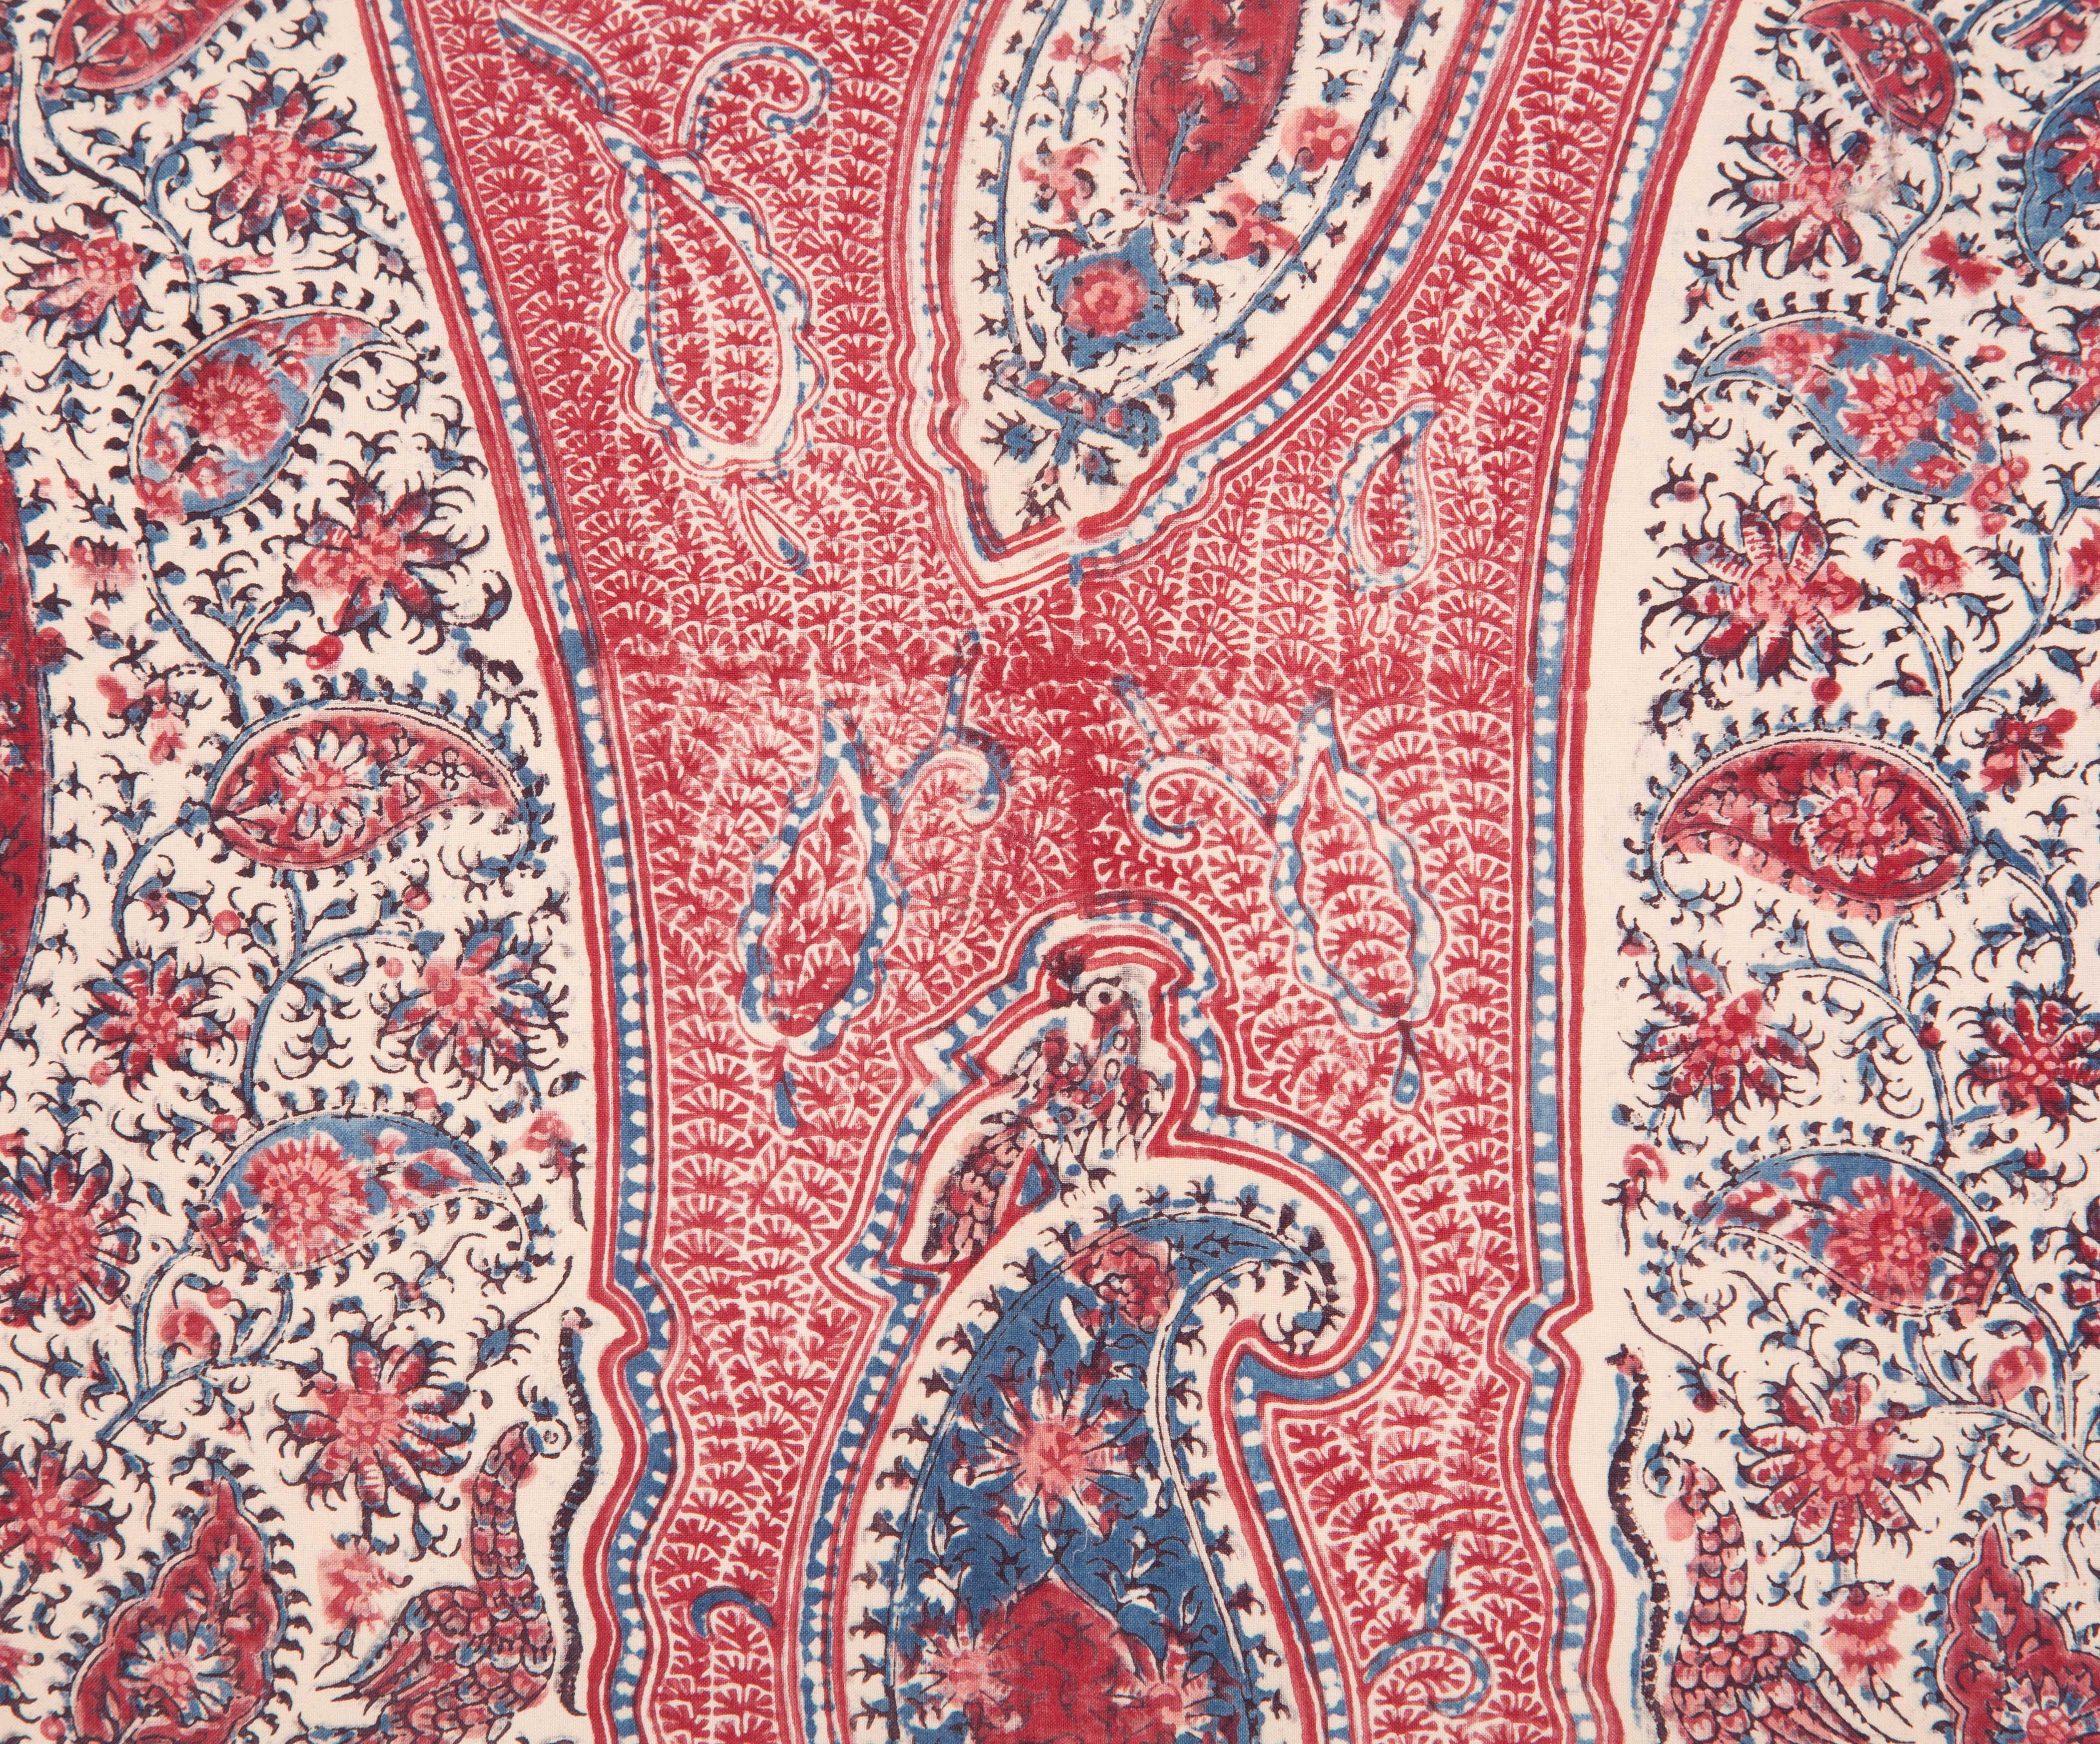 Cotton Lumbar Pillow Case Fashioned from an Antique Indian Qalamkar Panel, 19th Century